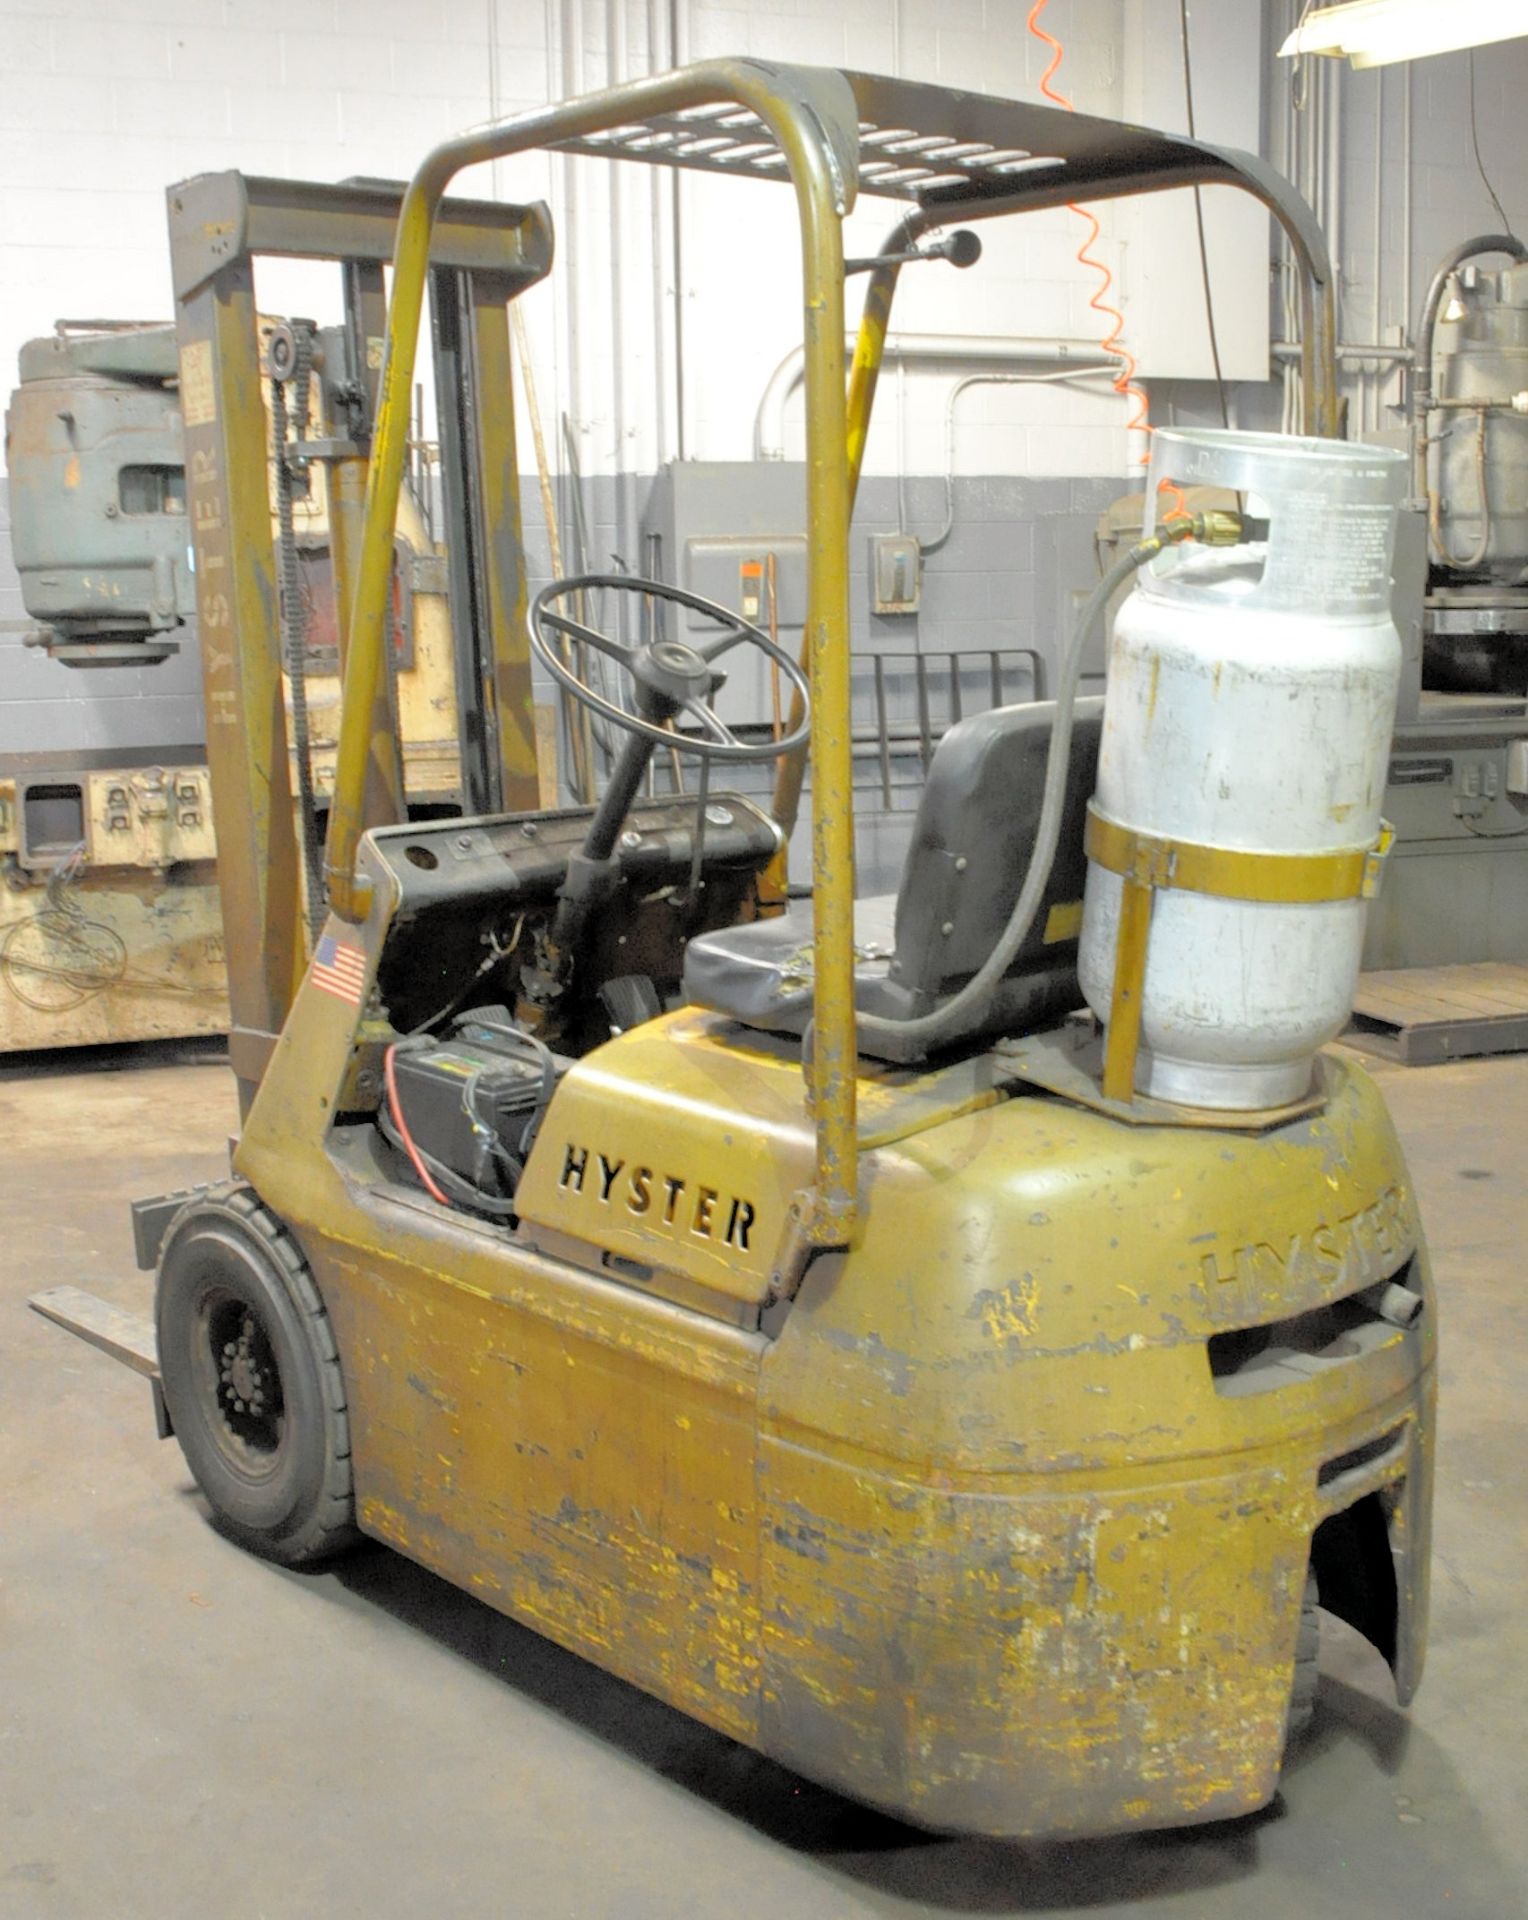 Hyster 3,350-LB Capacity 3-Wheel LP-Gas Forklift Truck - Image 4 of 6